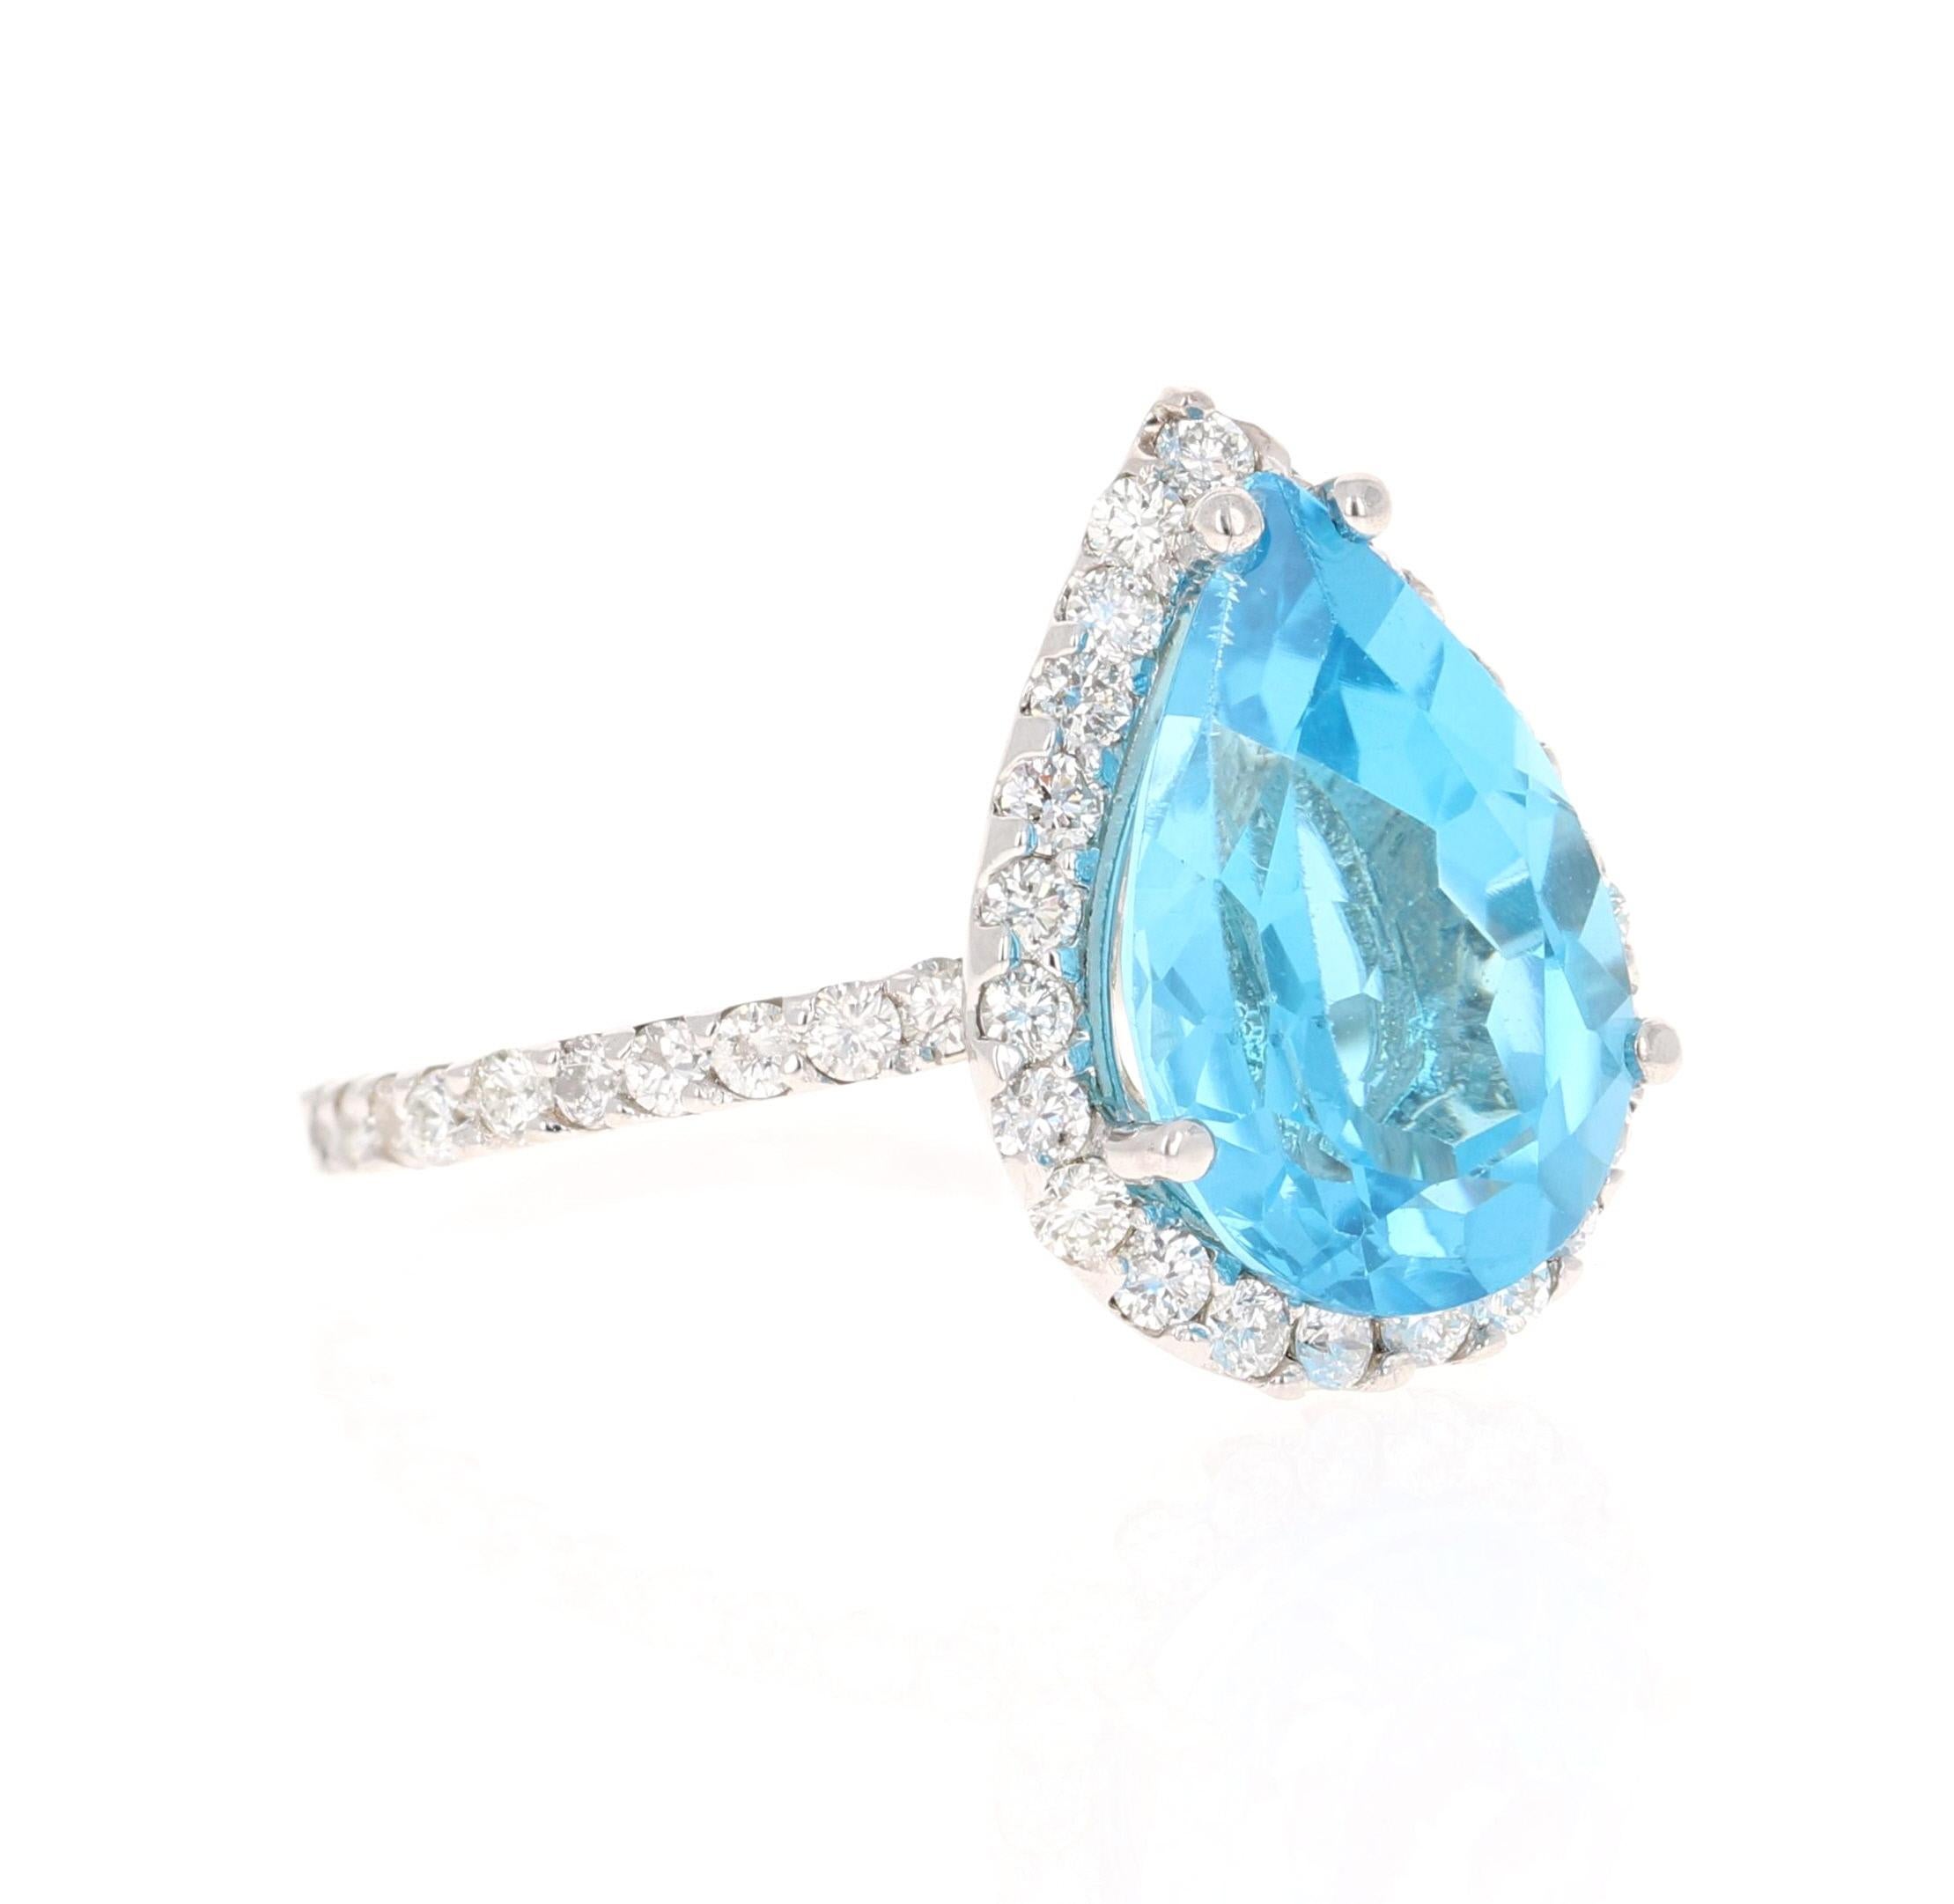 This stunning statement ring has a large Pear Cut Blue Topaz that weighs 5.60 Carats. 
It is surrounded by a simple halo of 45 Round Cut Diamonds that weigh 0.82 Carats. 

It is crafted in 14 Karat White Gold and weighs approximately 3.5 grams.